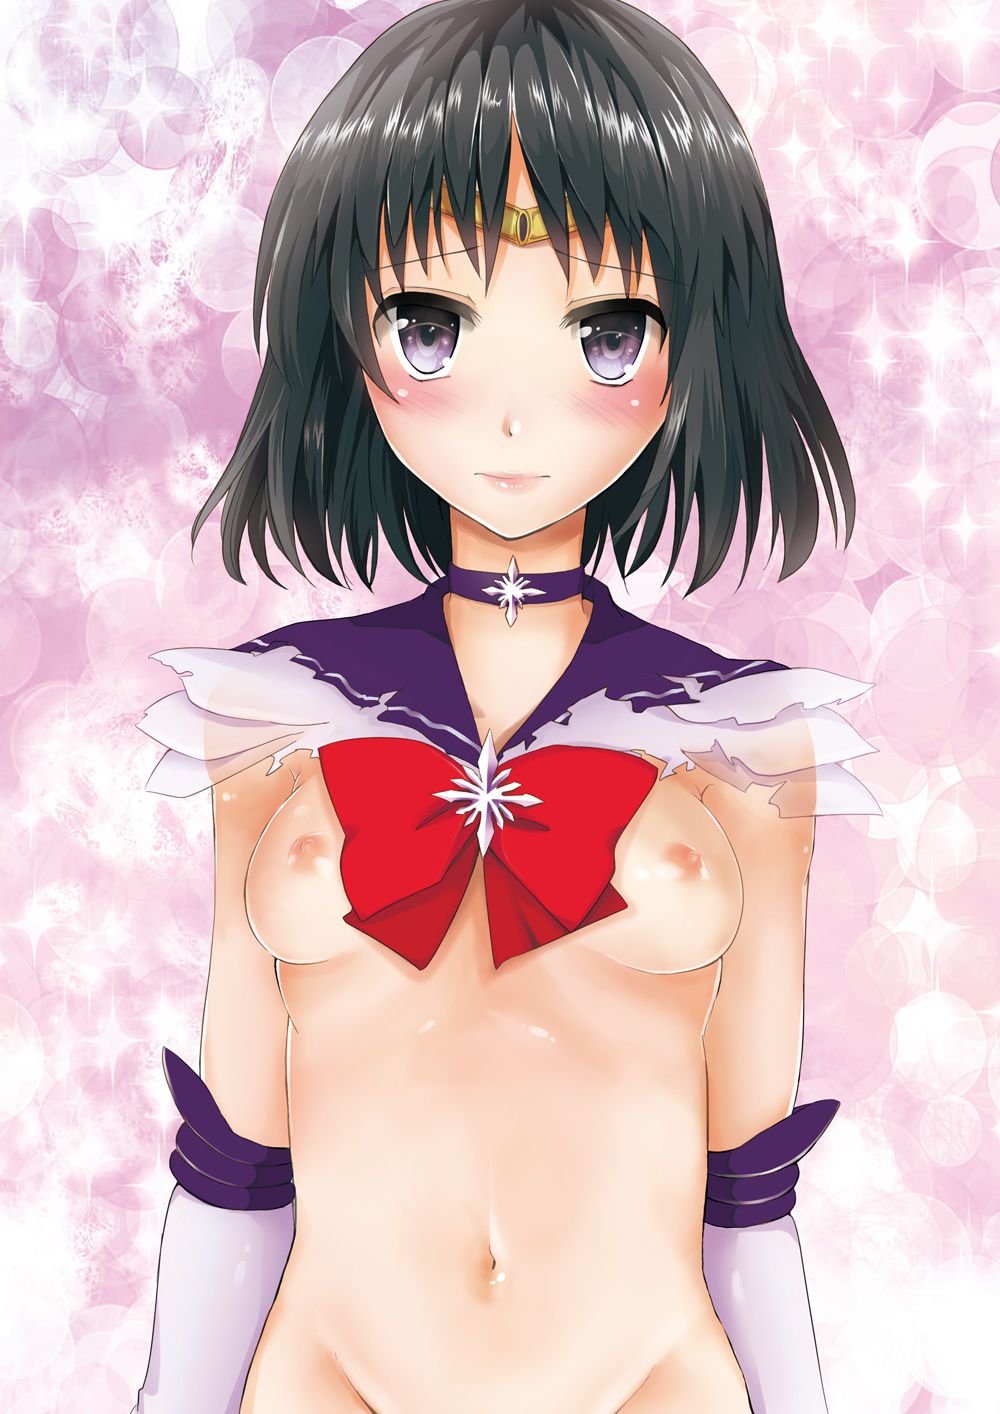 sex images of Sailor Saturn coming out! [Sailor Moon] 17